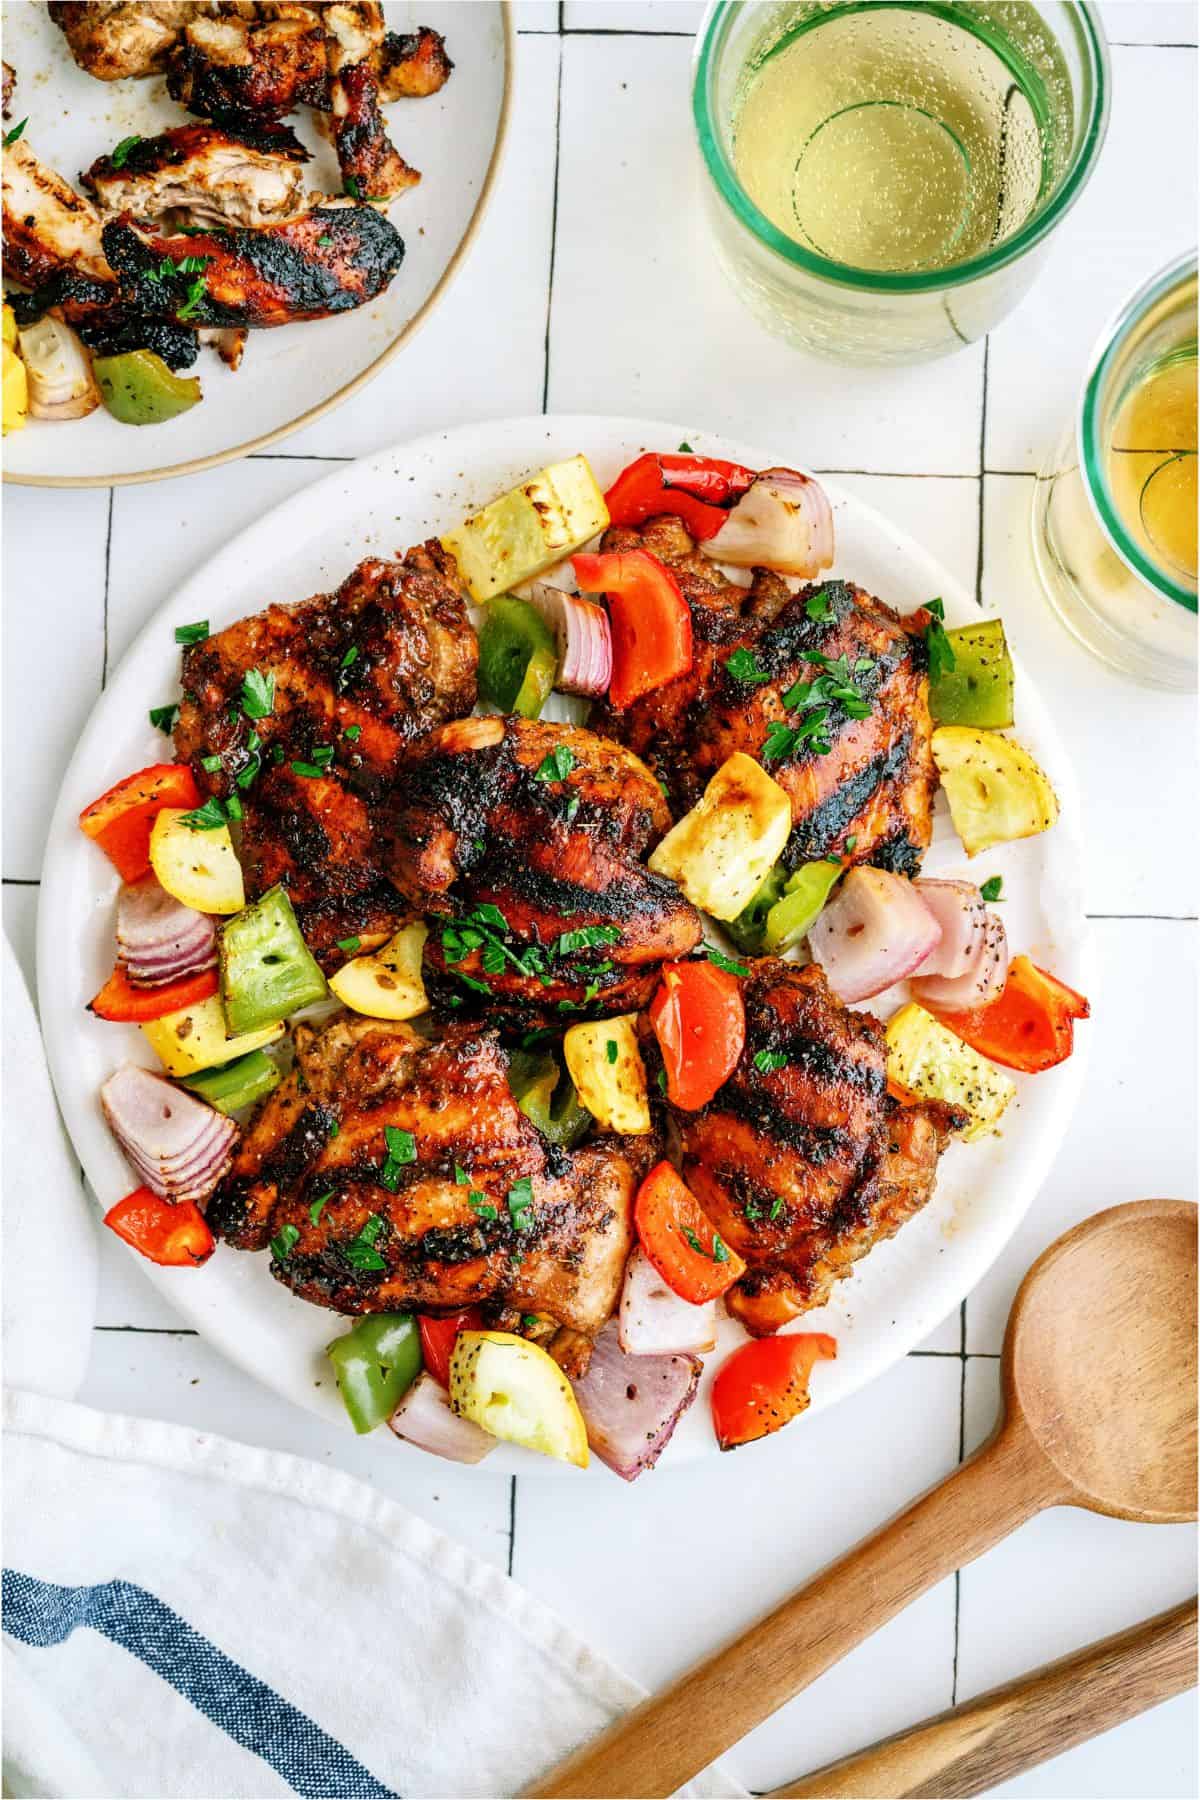 Top view of a plate of Grilled Boneless Chicken Thighs and grilled veggies